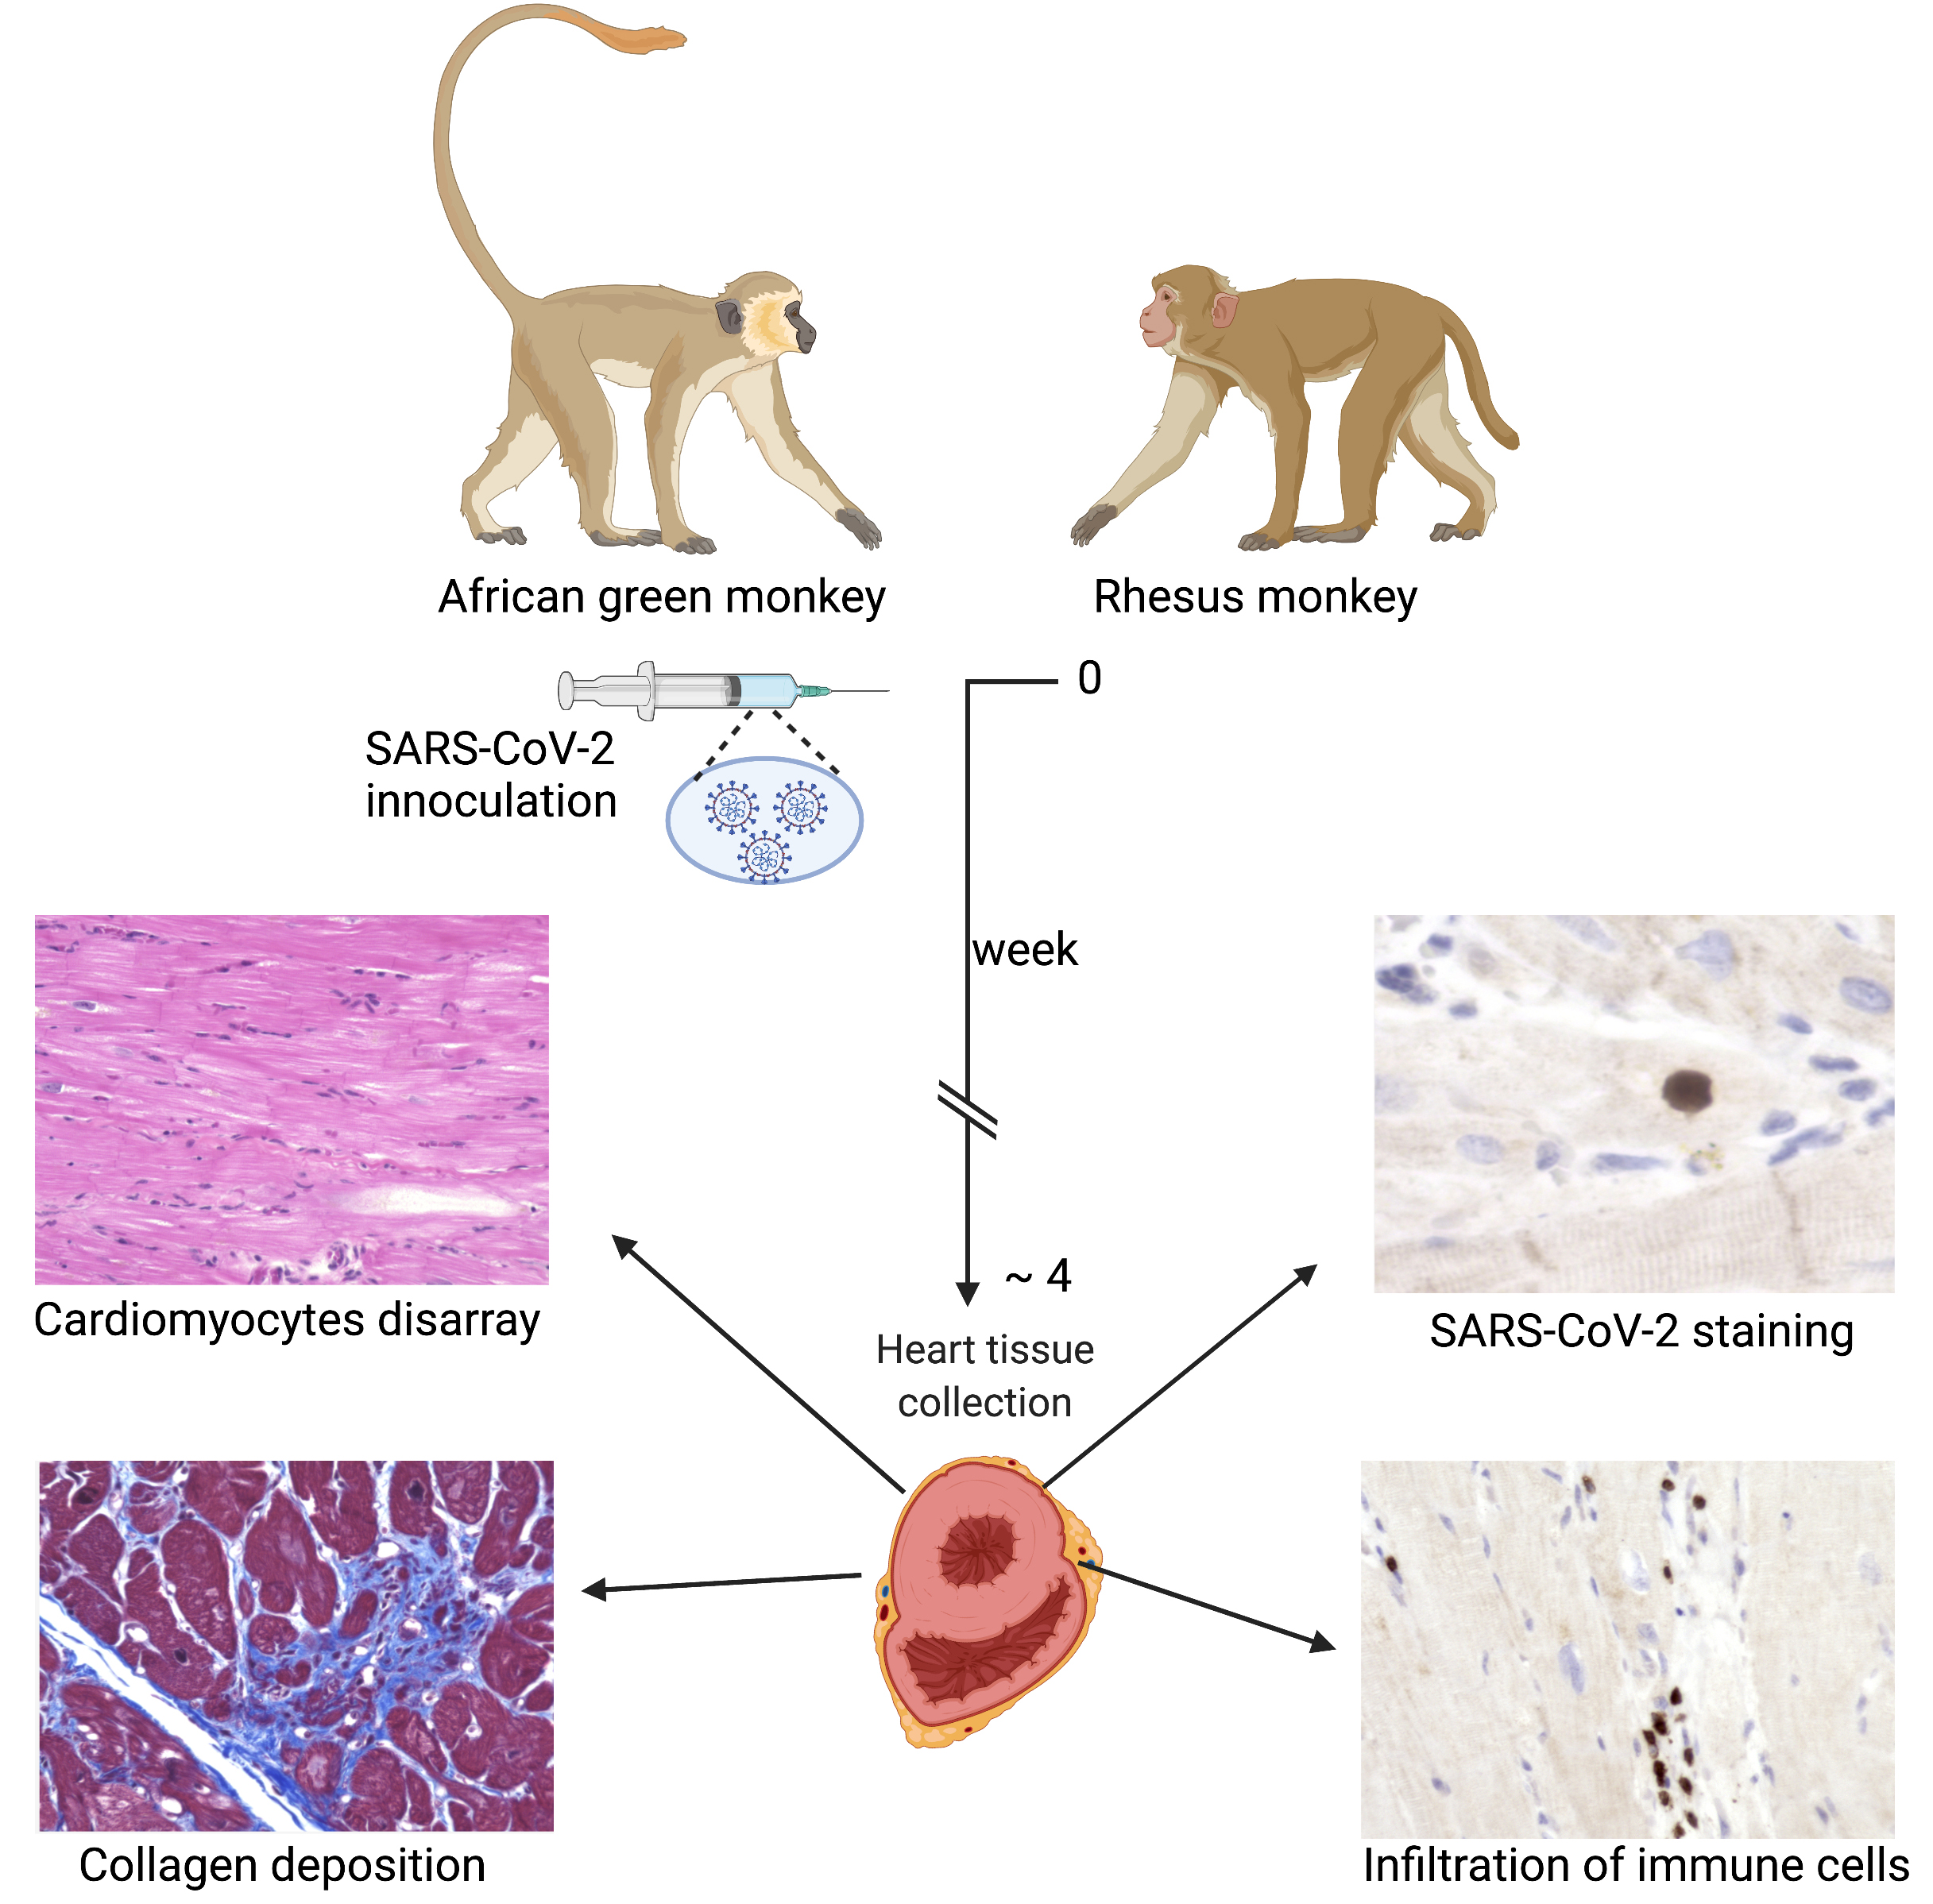 Cells | Free Full-Text | Activation of Immune System May Cause  Pathophysiological Changes in the Myocardium of SARS-CoV-2 Infected Monkey  Model